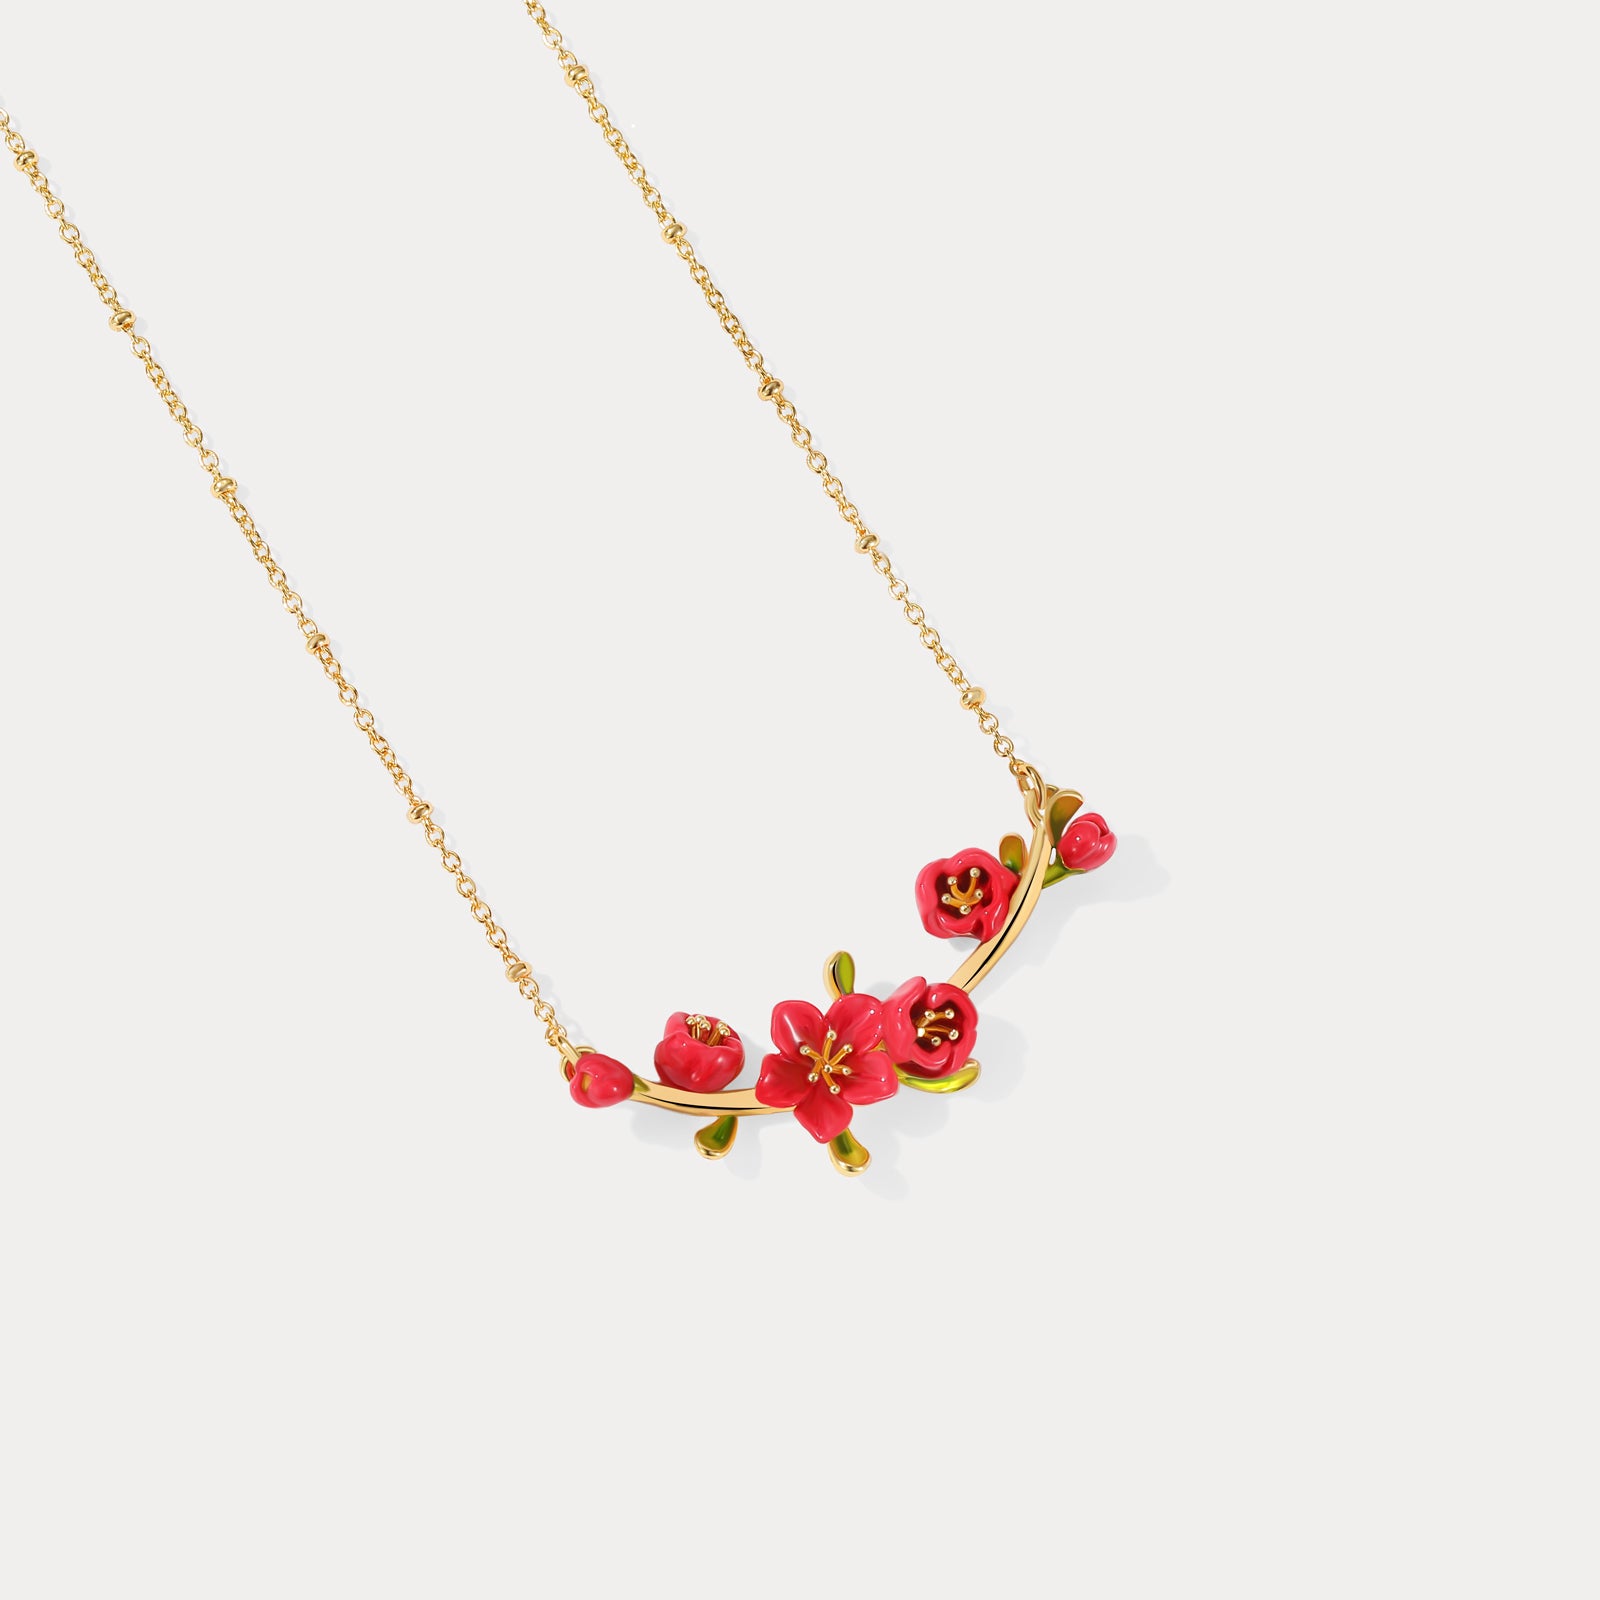 Begonia Flower Nature Necklace